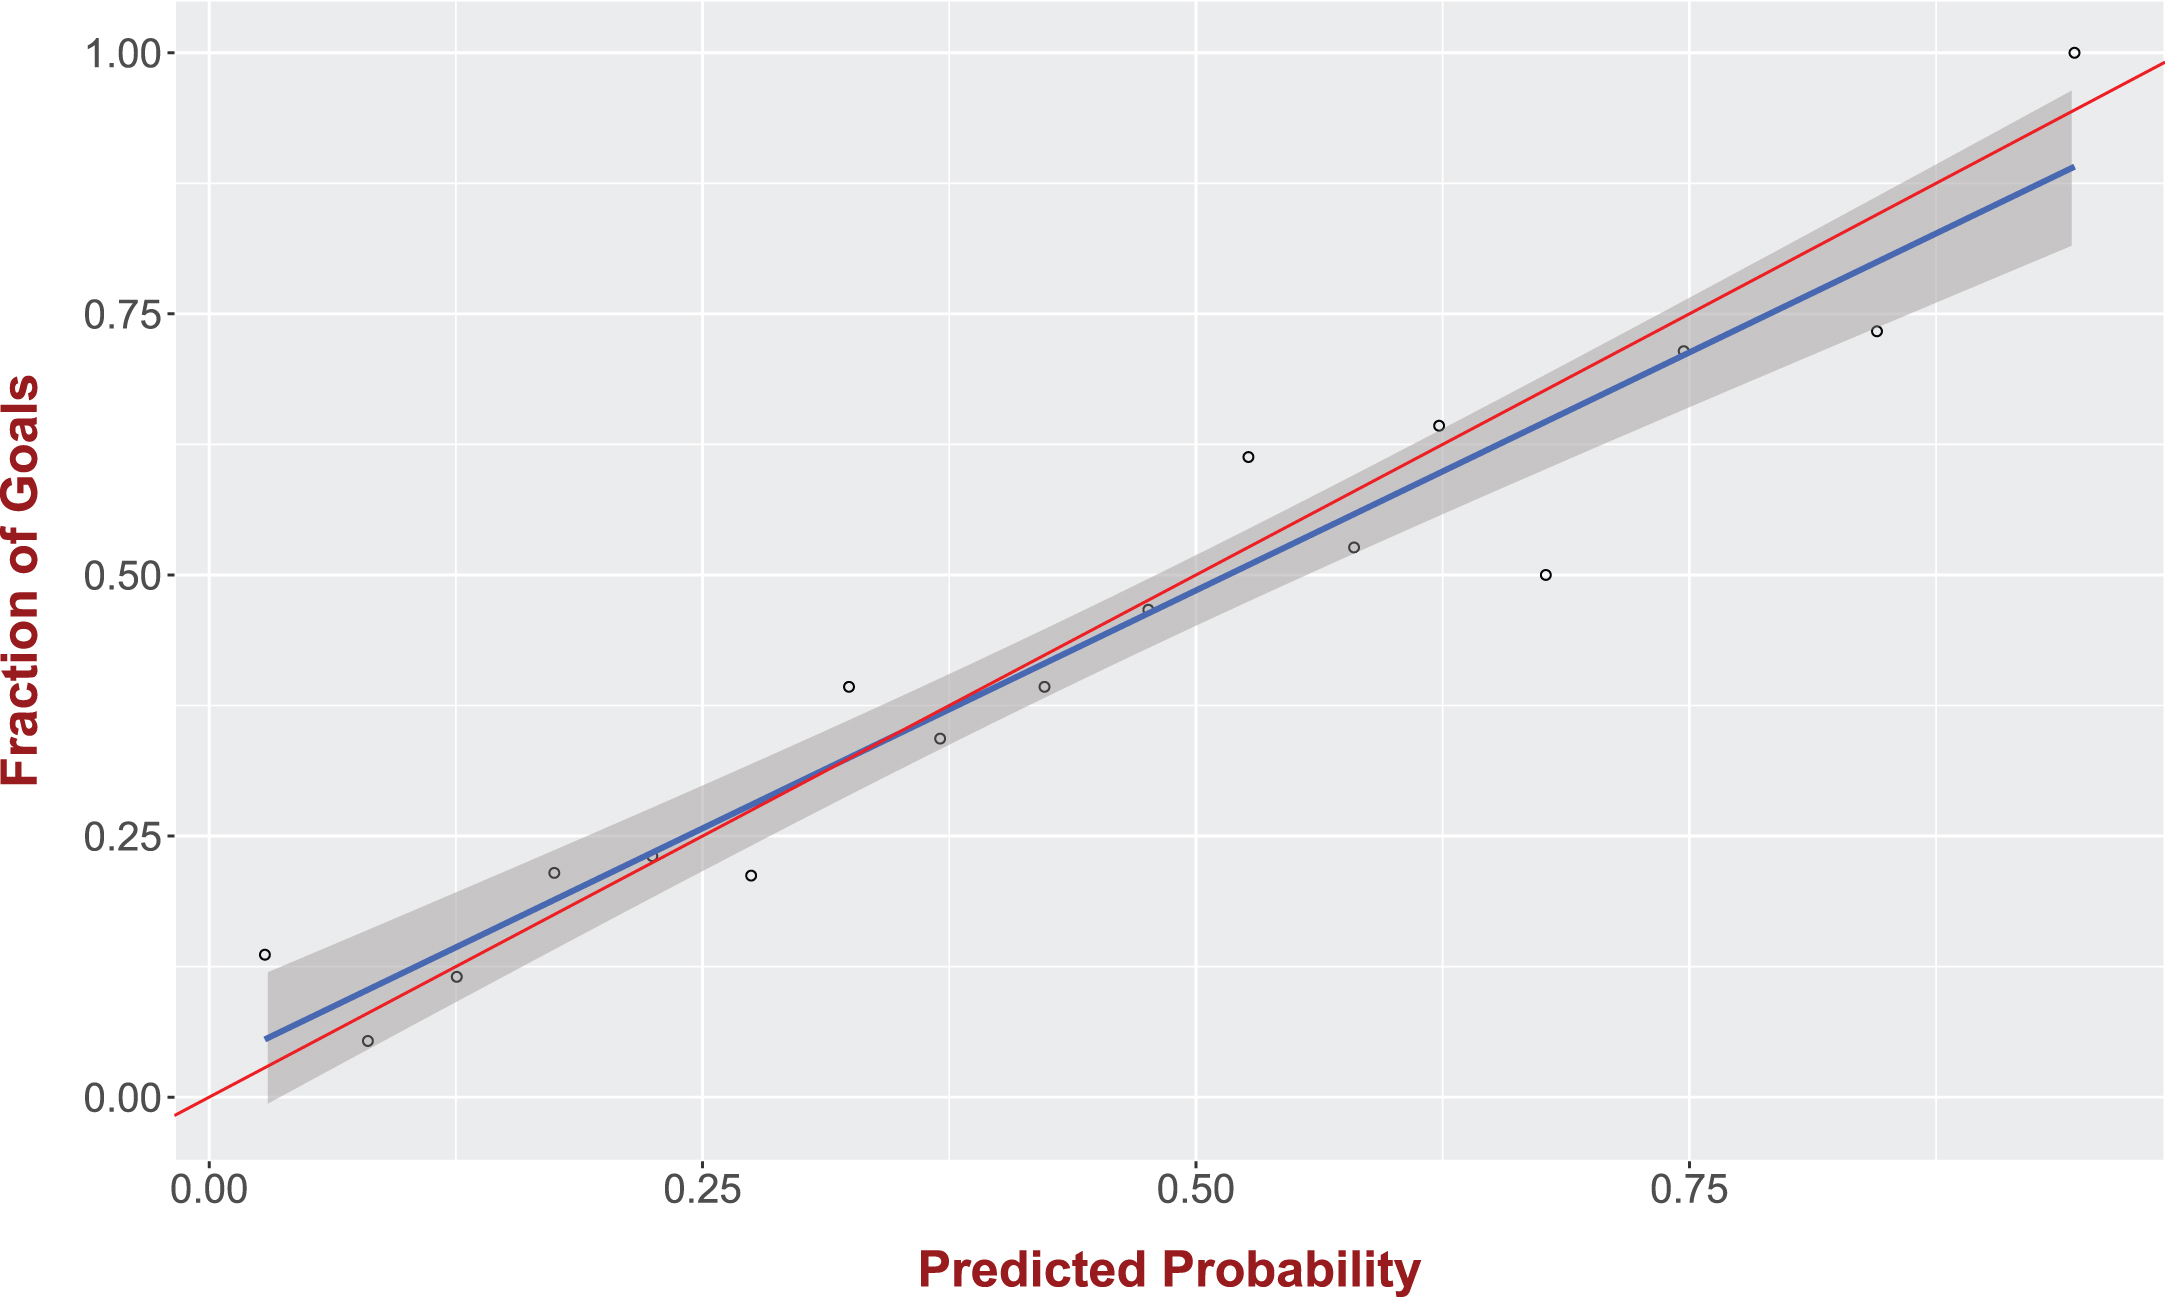 Our logistic regression model is providing accurate goal probabilities. For a given set of shots with predicted goal probability π the fraction of shots that resulted in a goal is also (approximately) equal to π.